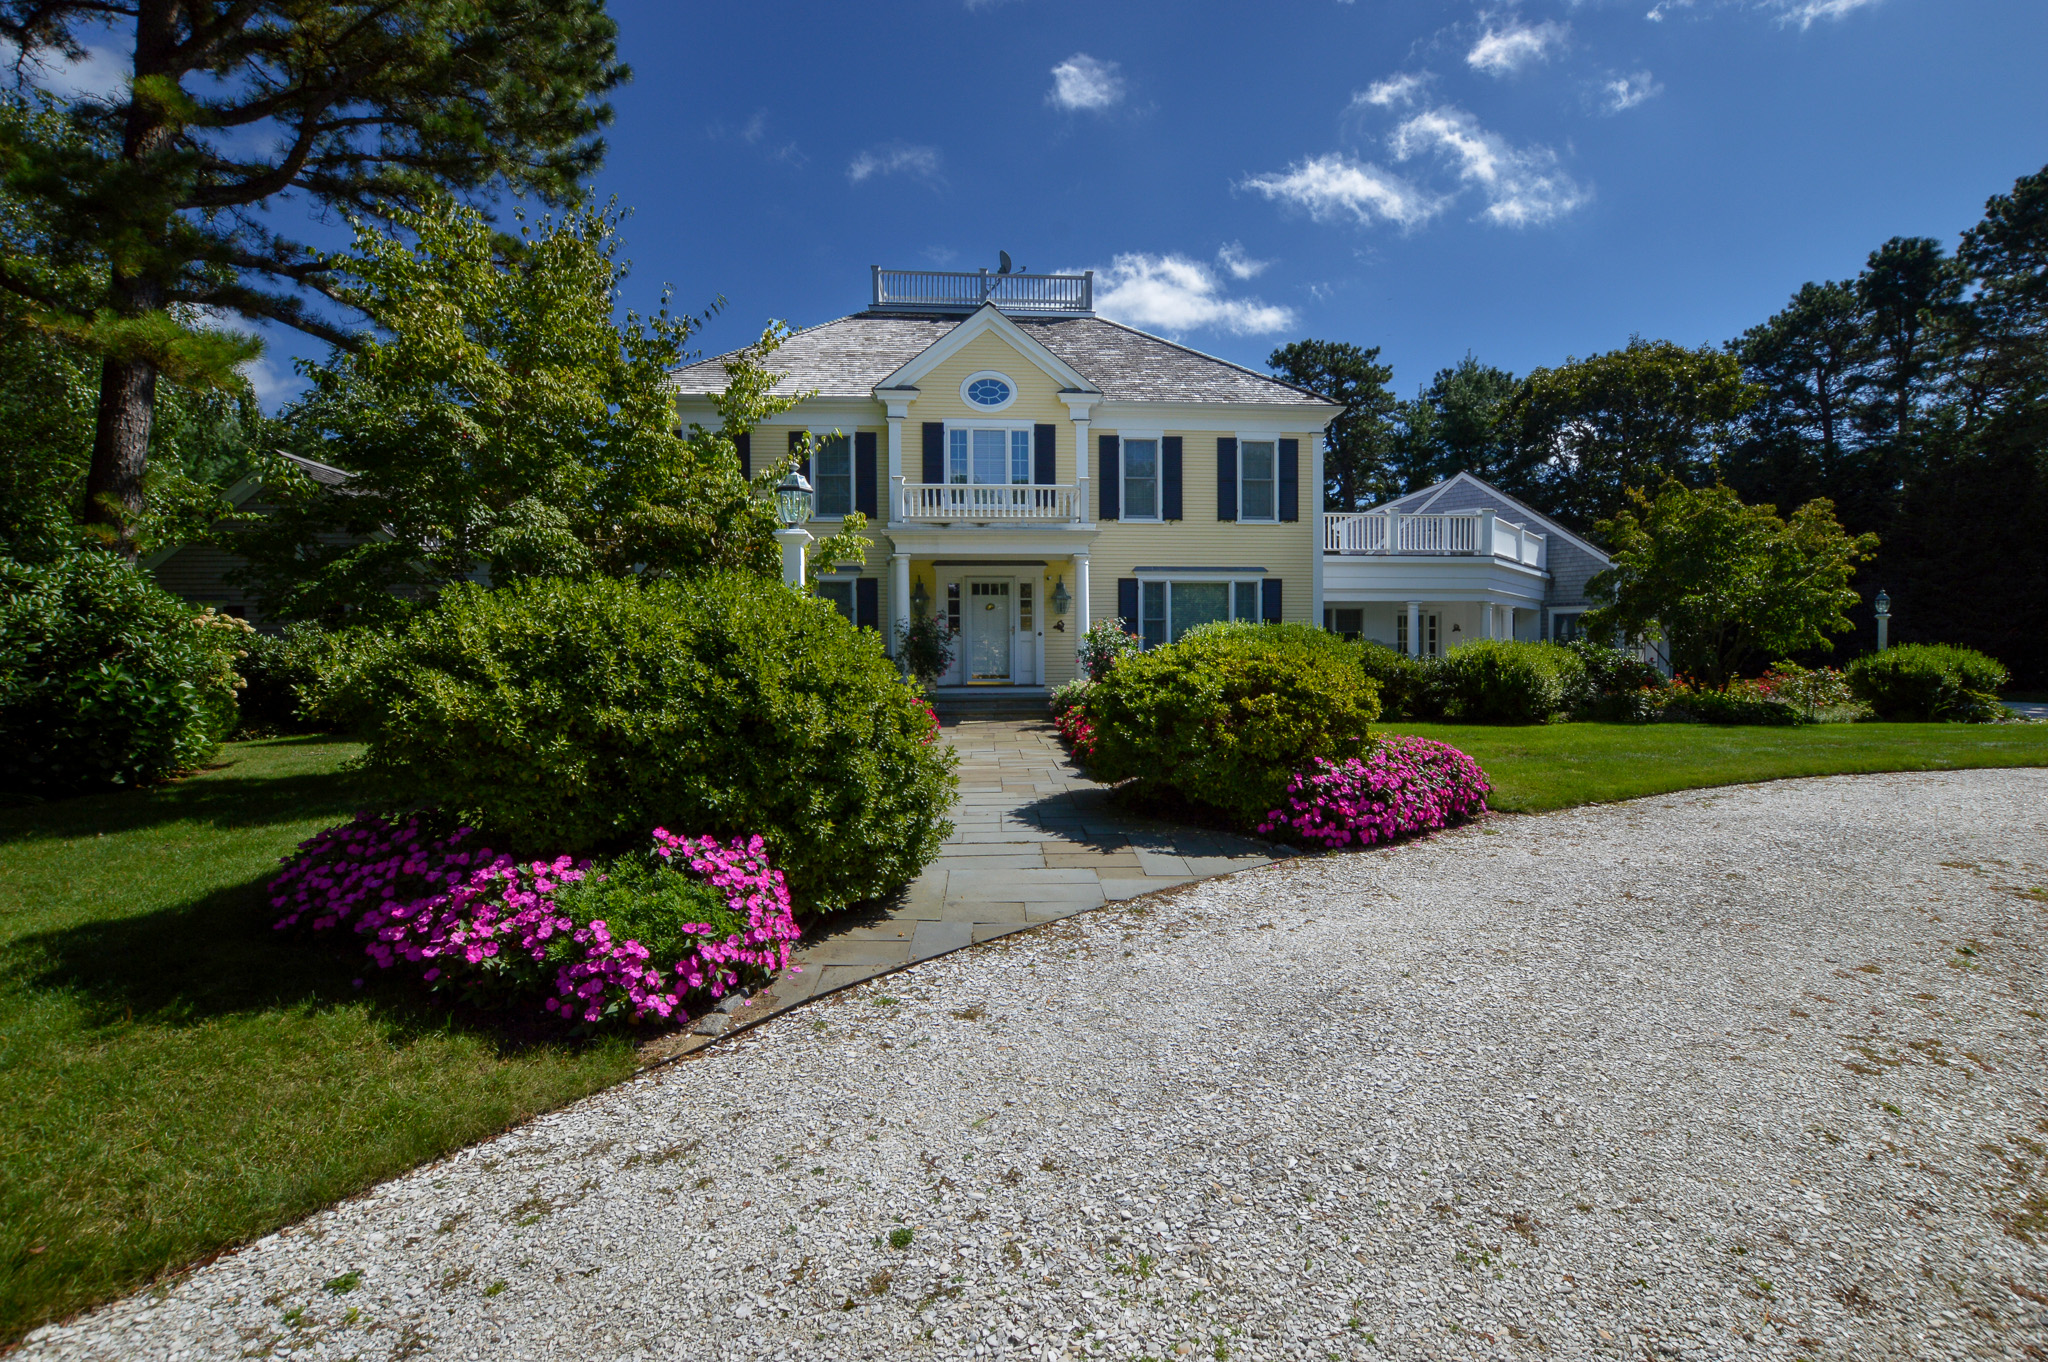 431 Baxters Neck Road, Barnstable, Massachusetts, 02648, United States, 4 Bedrooms Bedrooms, ,5 BathroomsBathrooms,Residential,For Sale,Baxters Neck,1339887